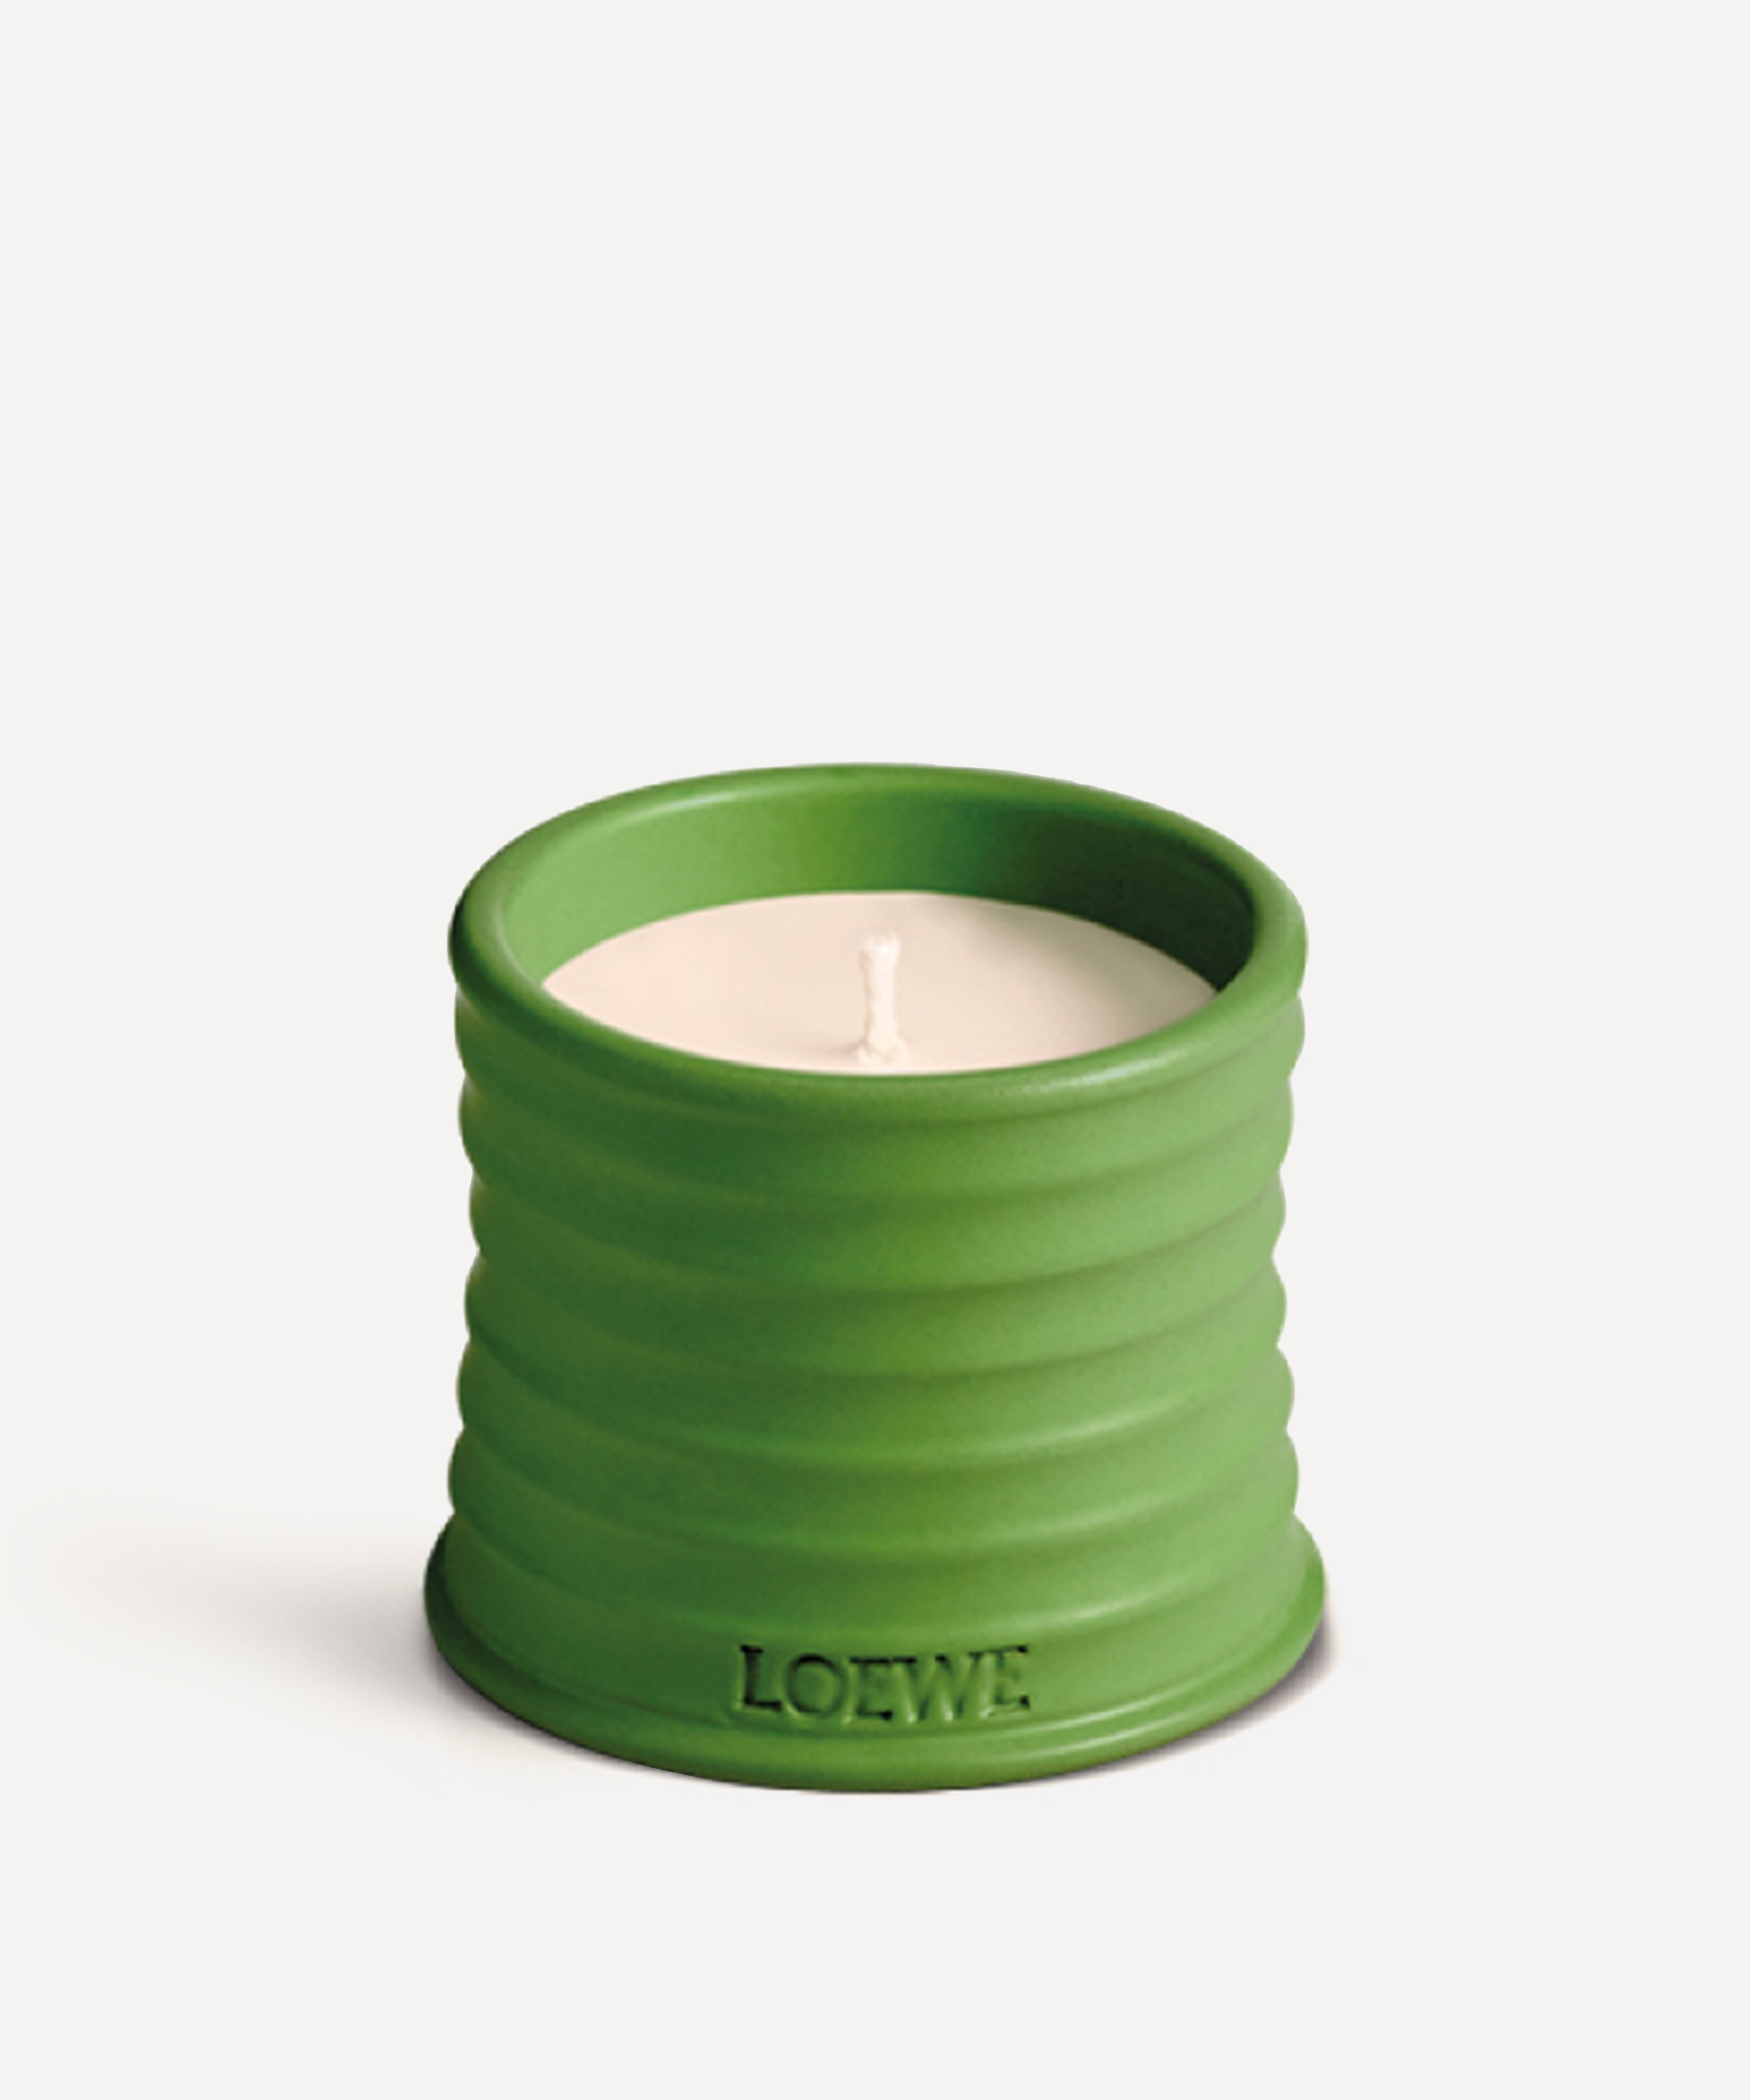 Loewe - Small Luscious Pea Candle 170g image number 0